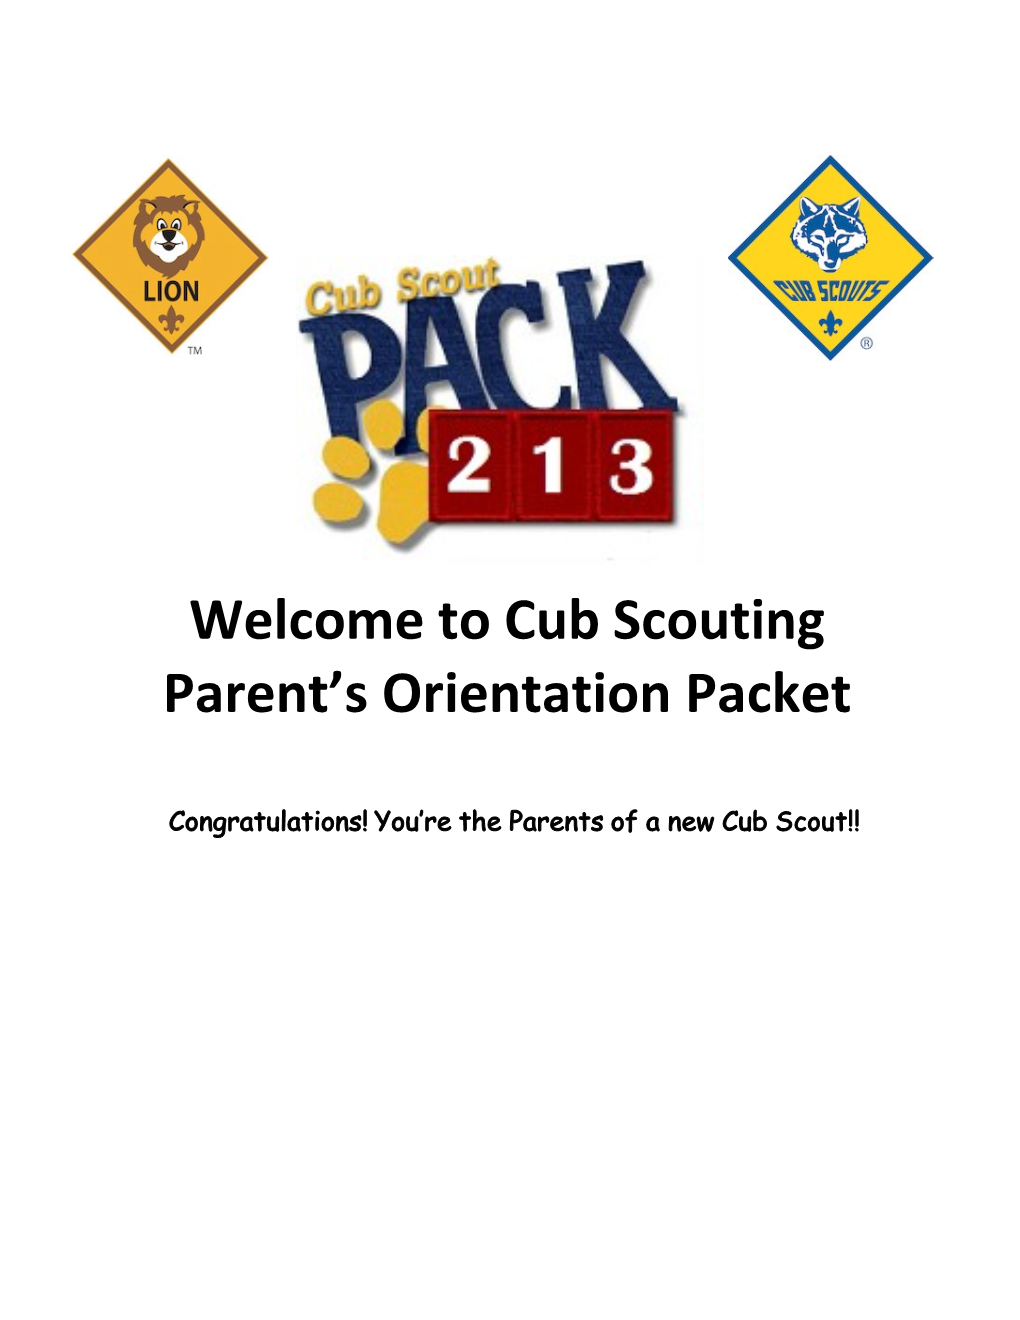 Welcome to Cub Scouting Parent's Orientation Packet